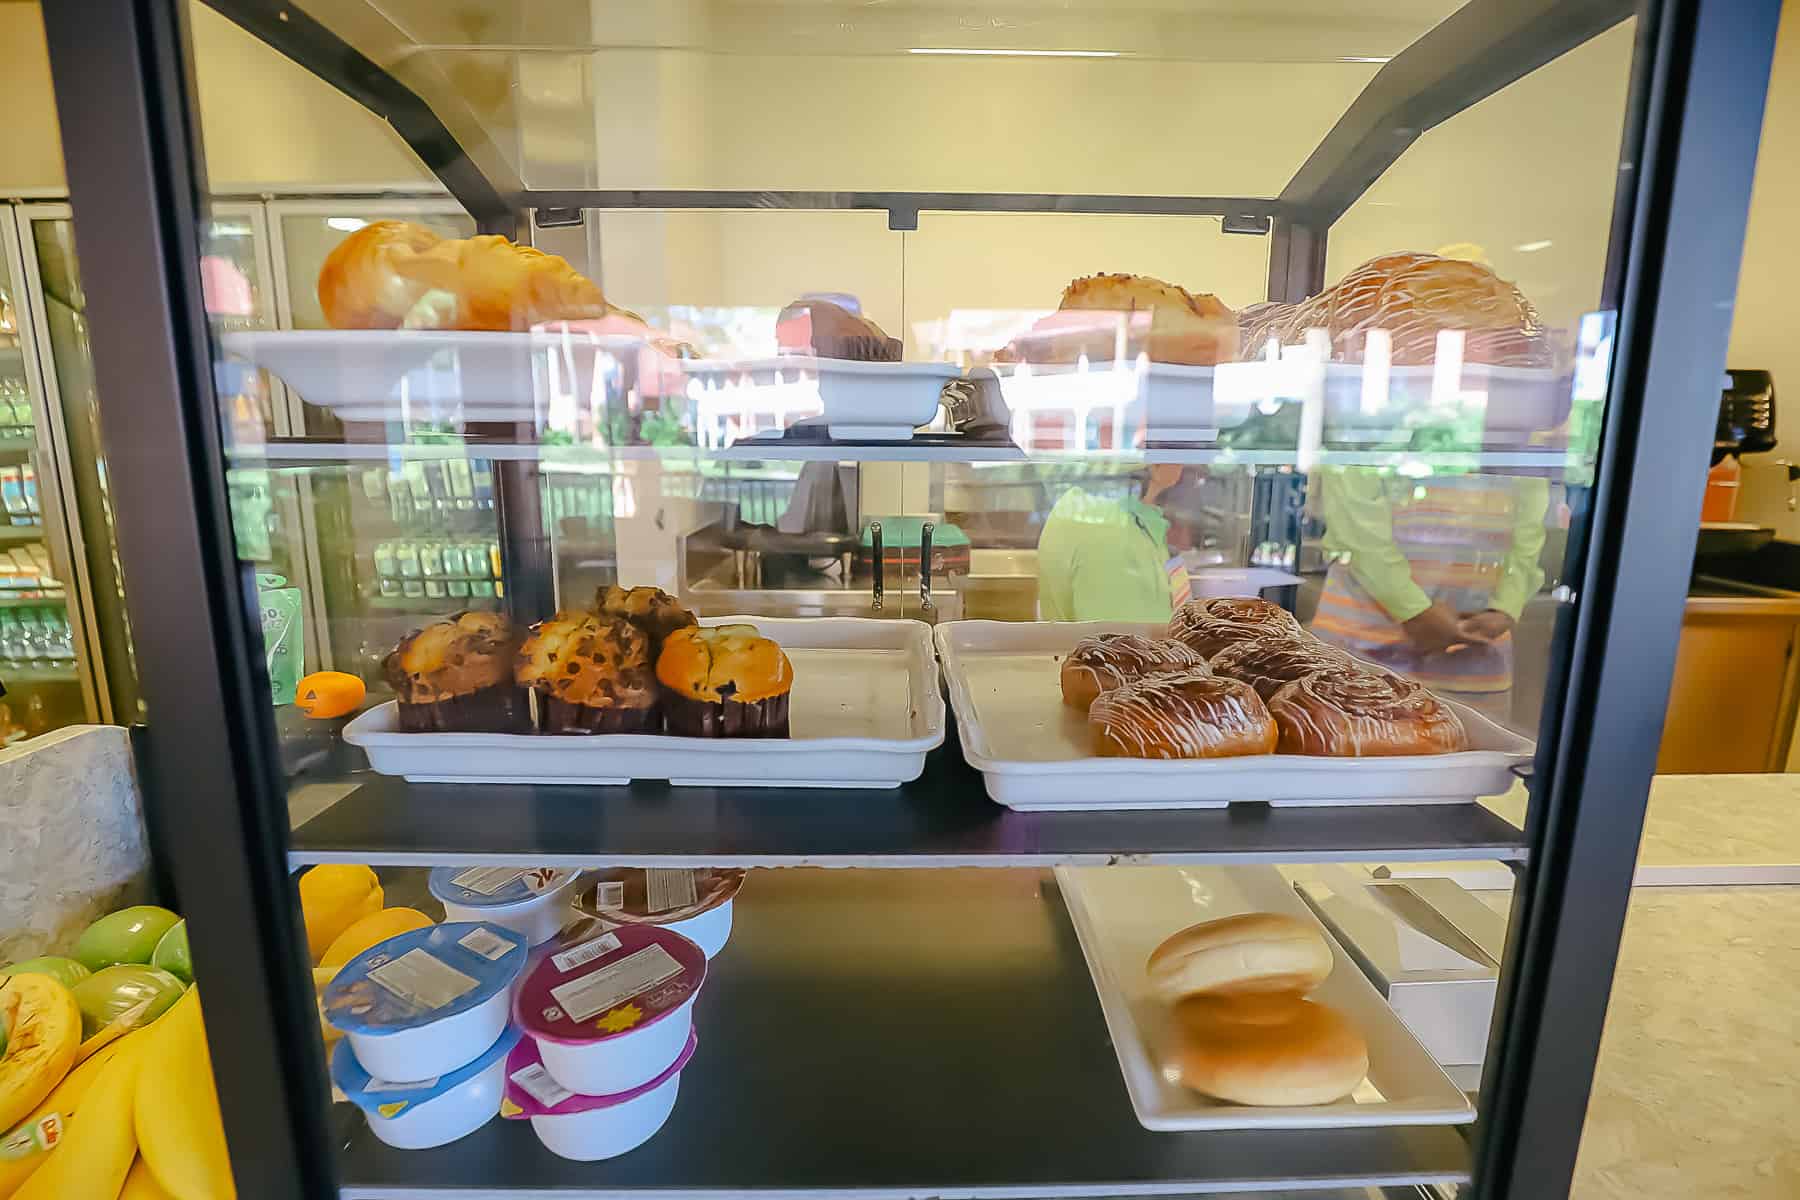 pastry selection with croissants, turnovers, muffins, bagels, and cinnamon rolls